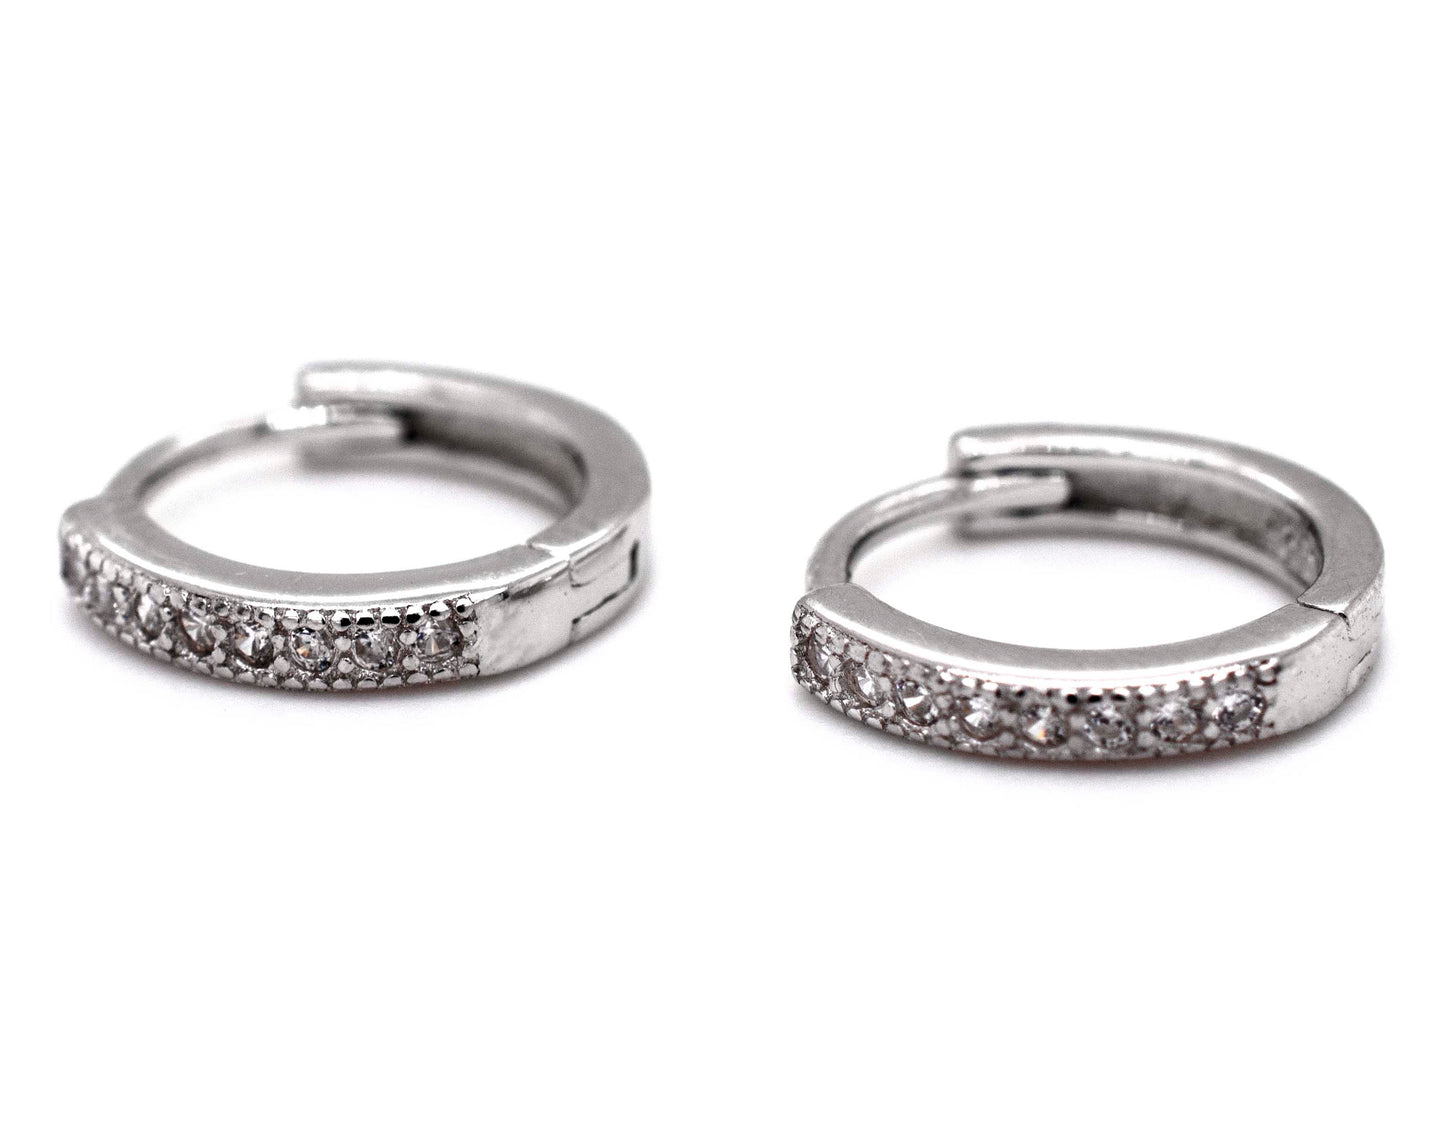 A pair of Super Silver Small Pave Cubic Zirconia Hoops with diamond alternatives.